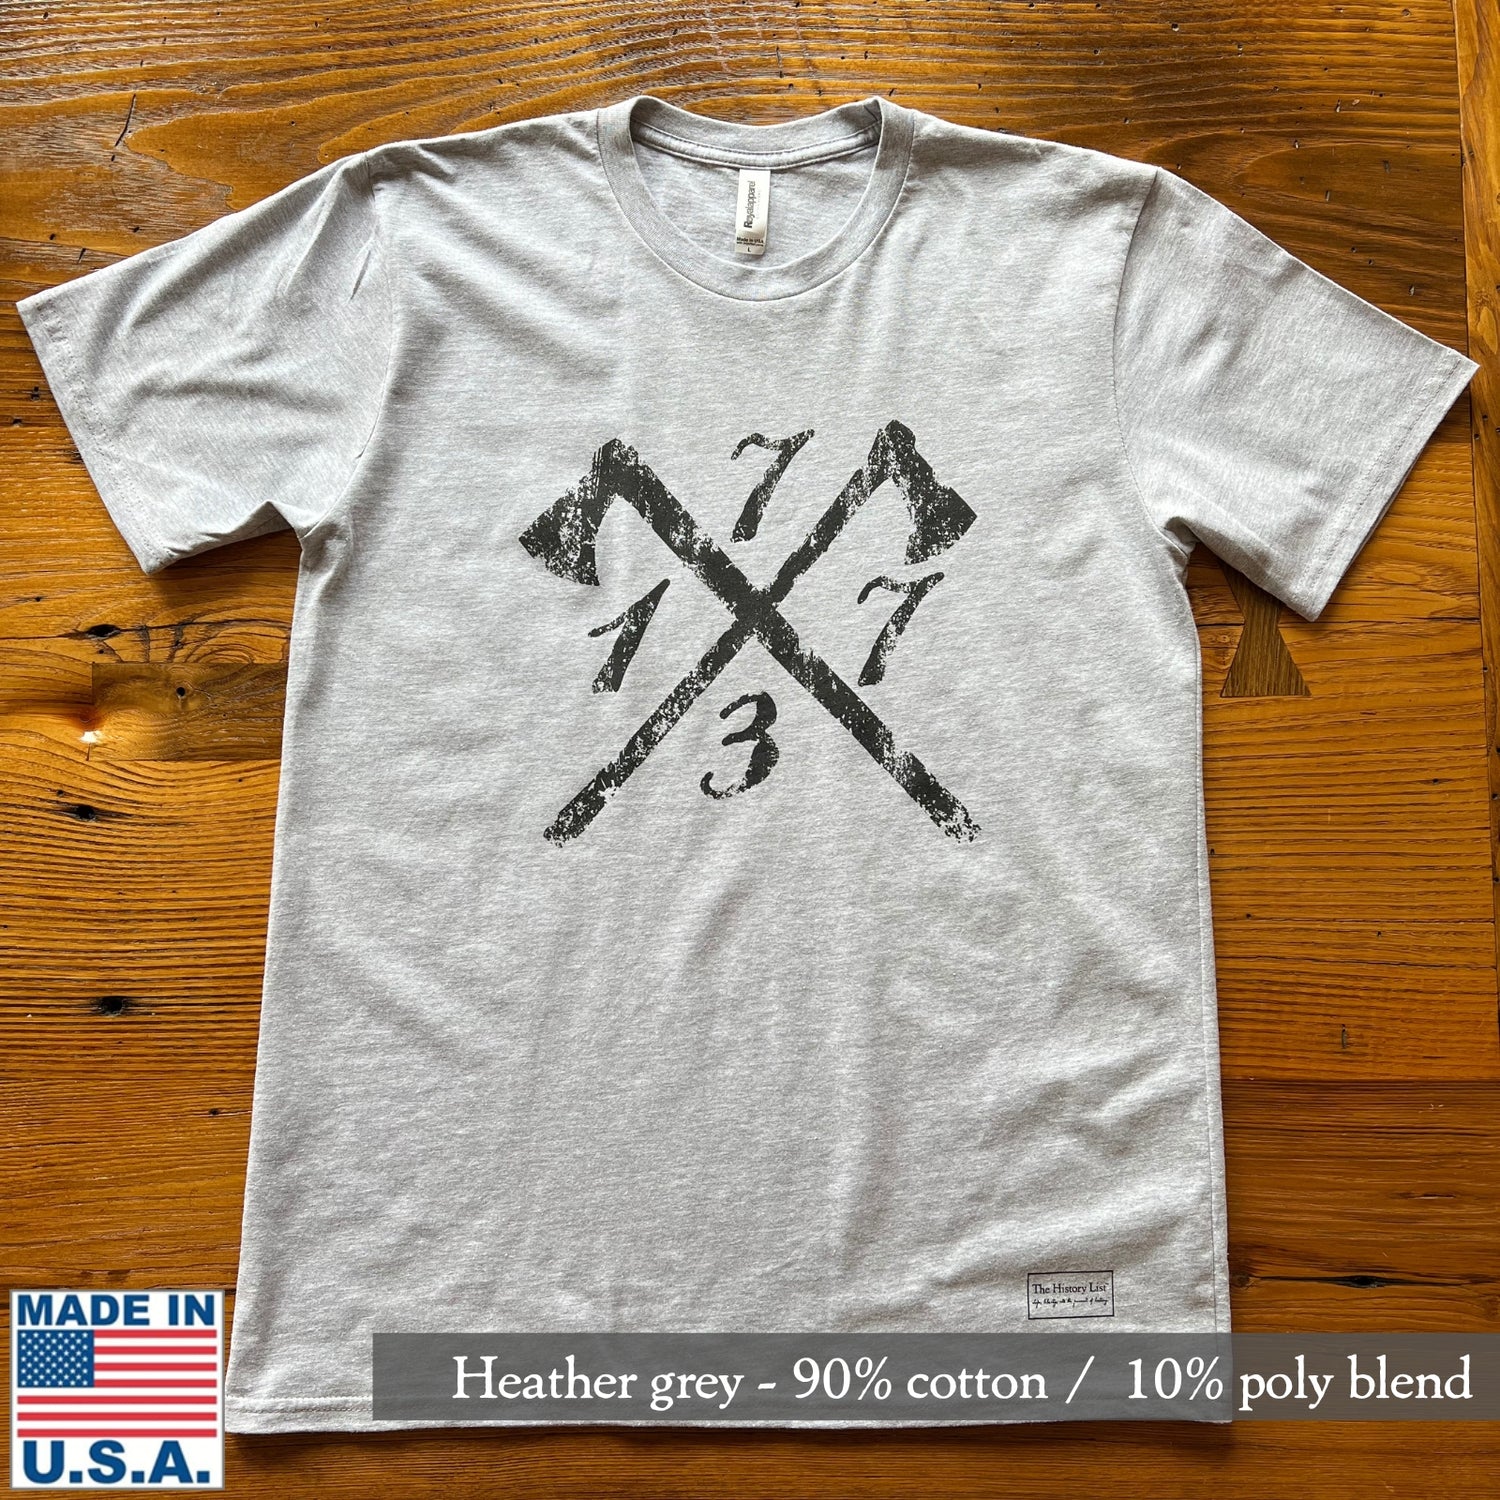 "Boston" shirts - "1773", "One if by Land..." Old North Church Special, and "Occupied Boston"